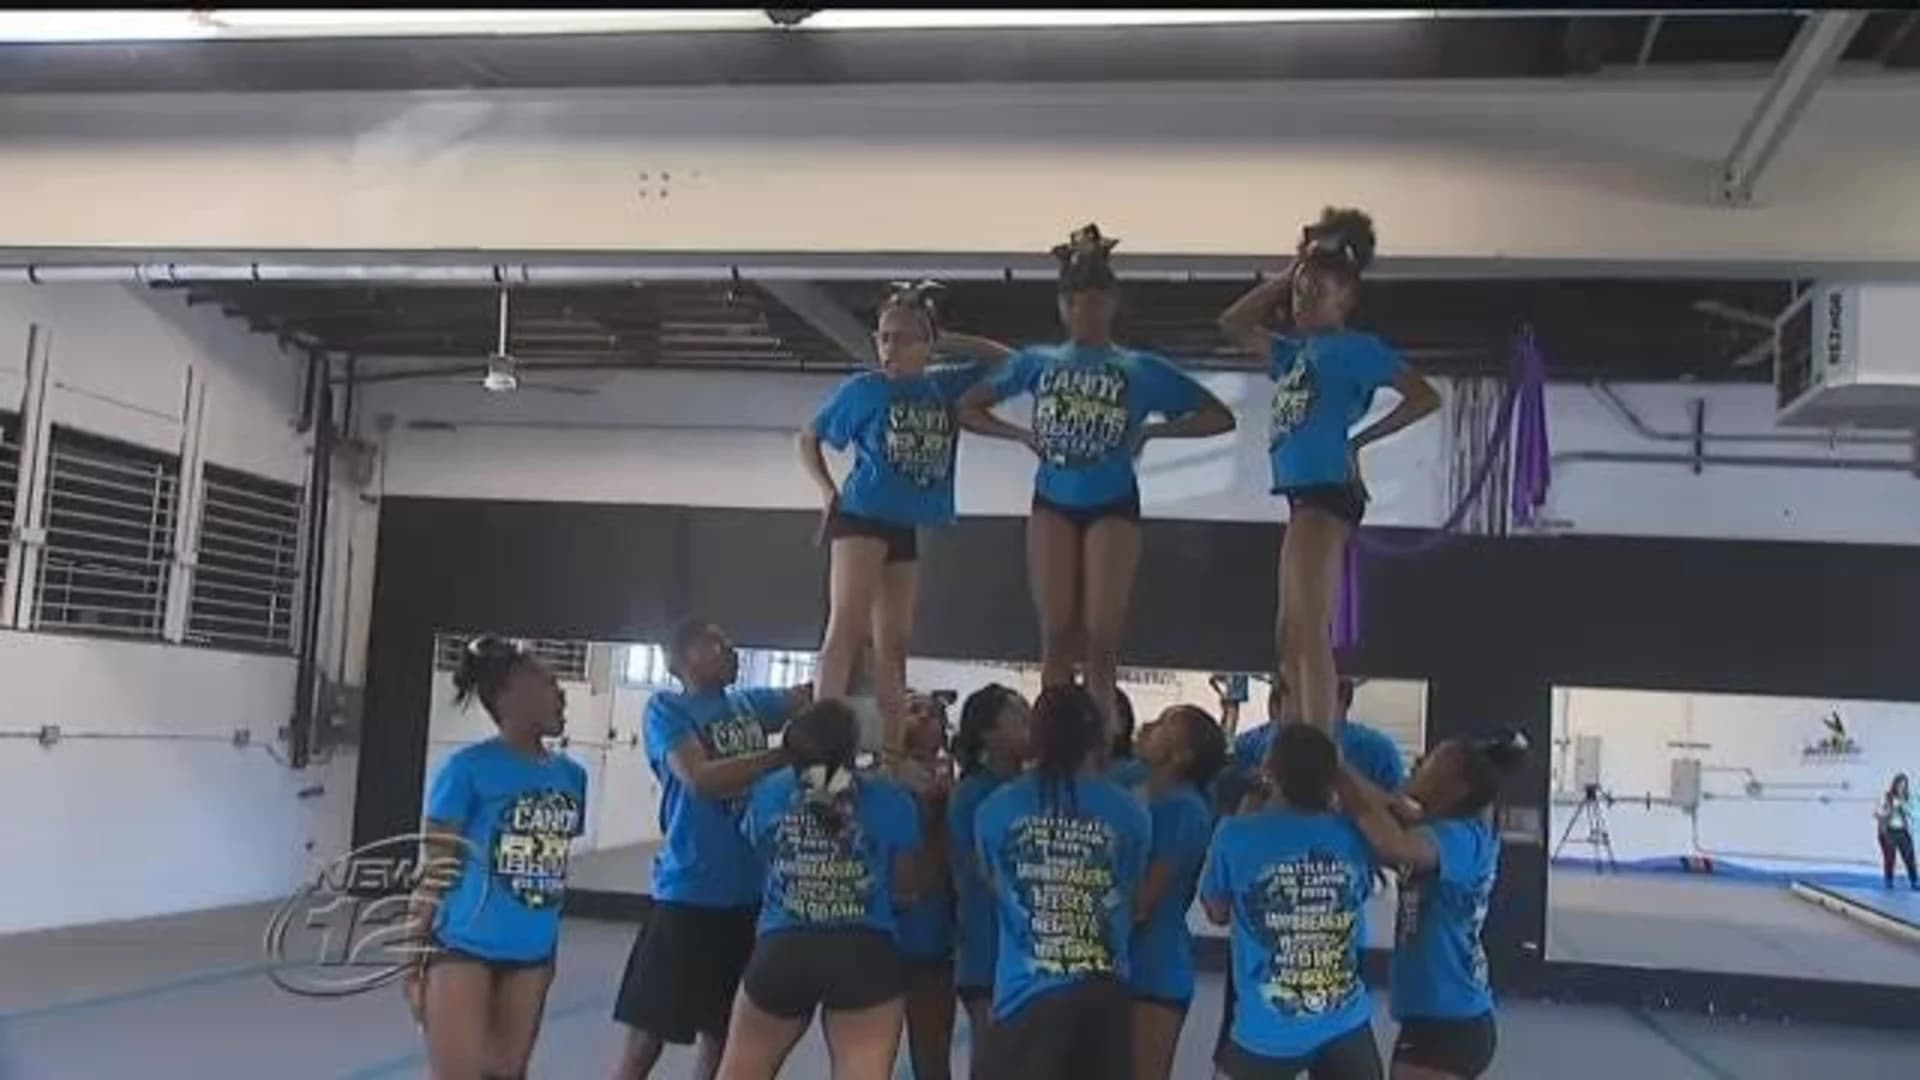 Newark cheer squad makes nationals, needs funds to get there